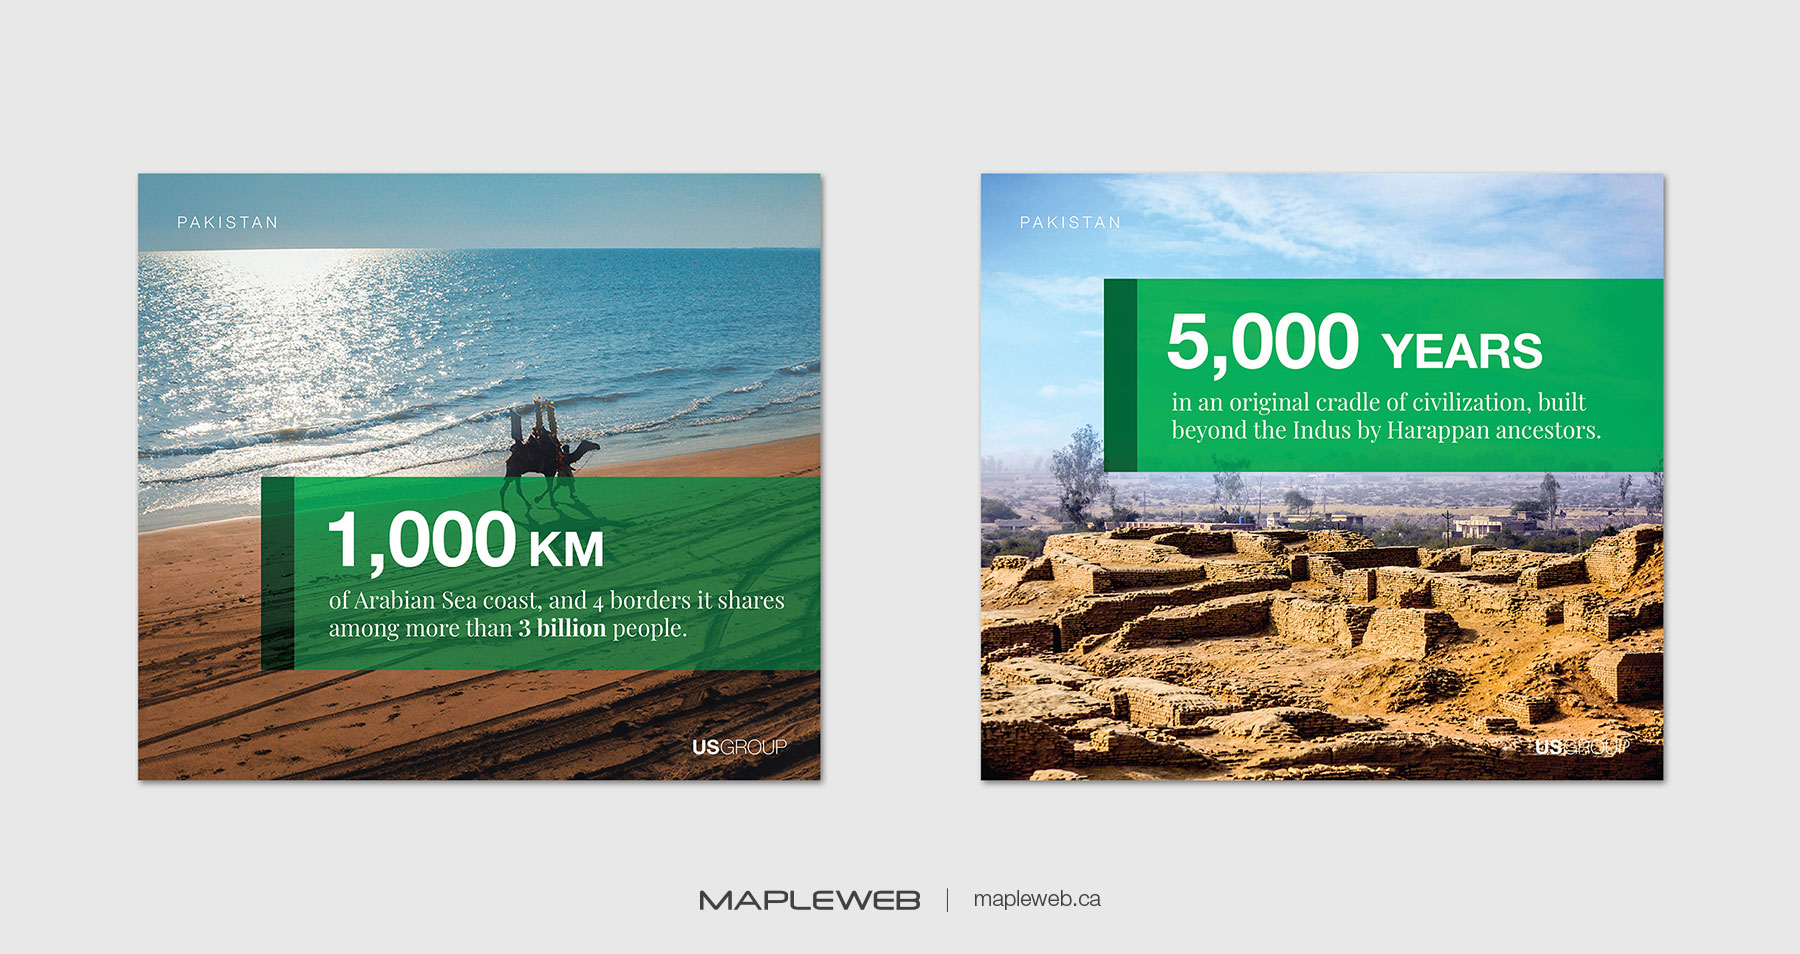 Us Group Brand Magazine Pages Displaying Arabian Sea and Harappan Civilization design by Mapleweb